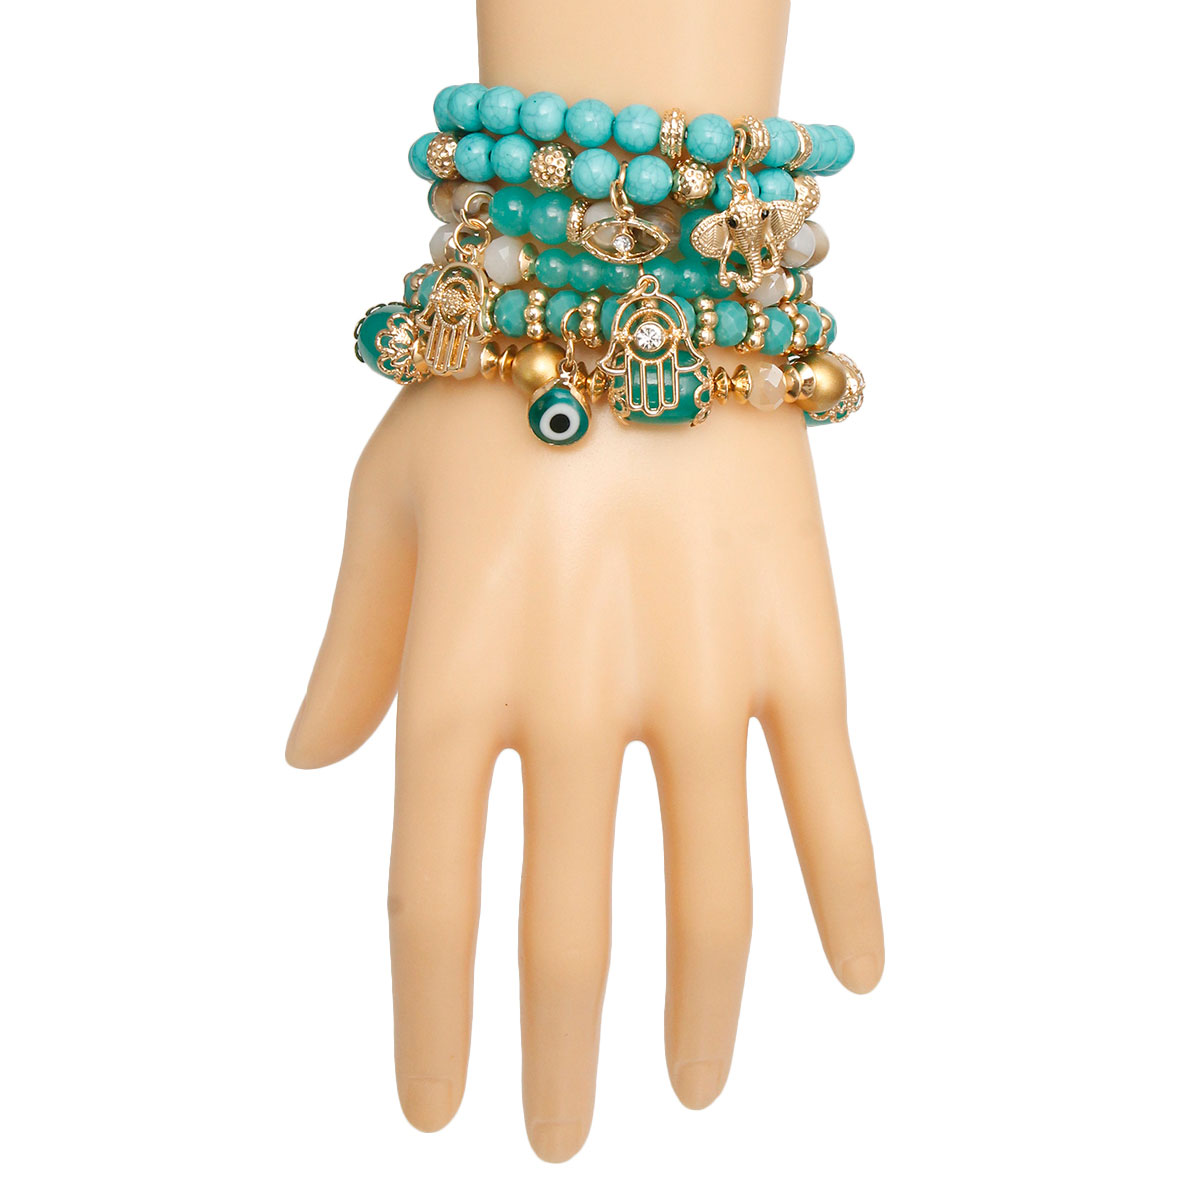 Turquoise Luck and Protection Charm Bracelets